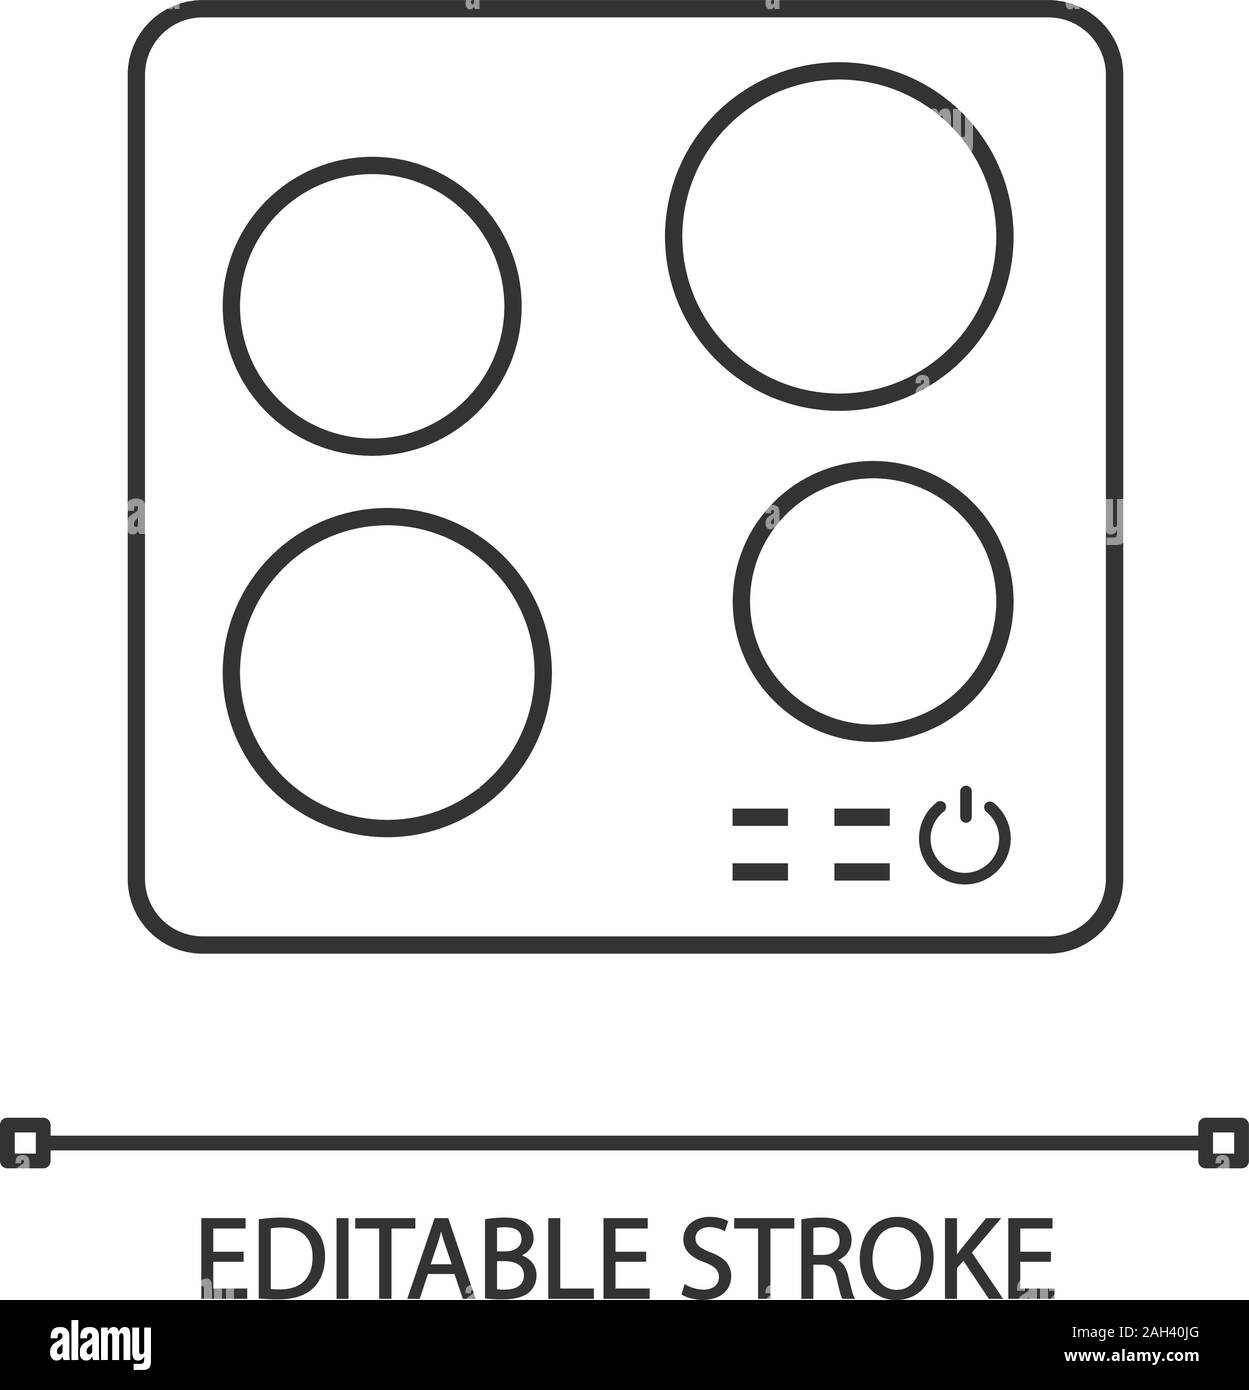 Electric induction hob linear icon. Cooktop. Thin line illustration. Cooking panel, surface. Induction stove or built in cooker. Contour symbol. Vecto Stock Vector